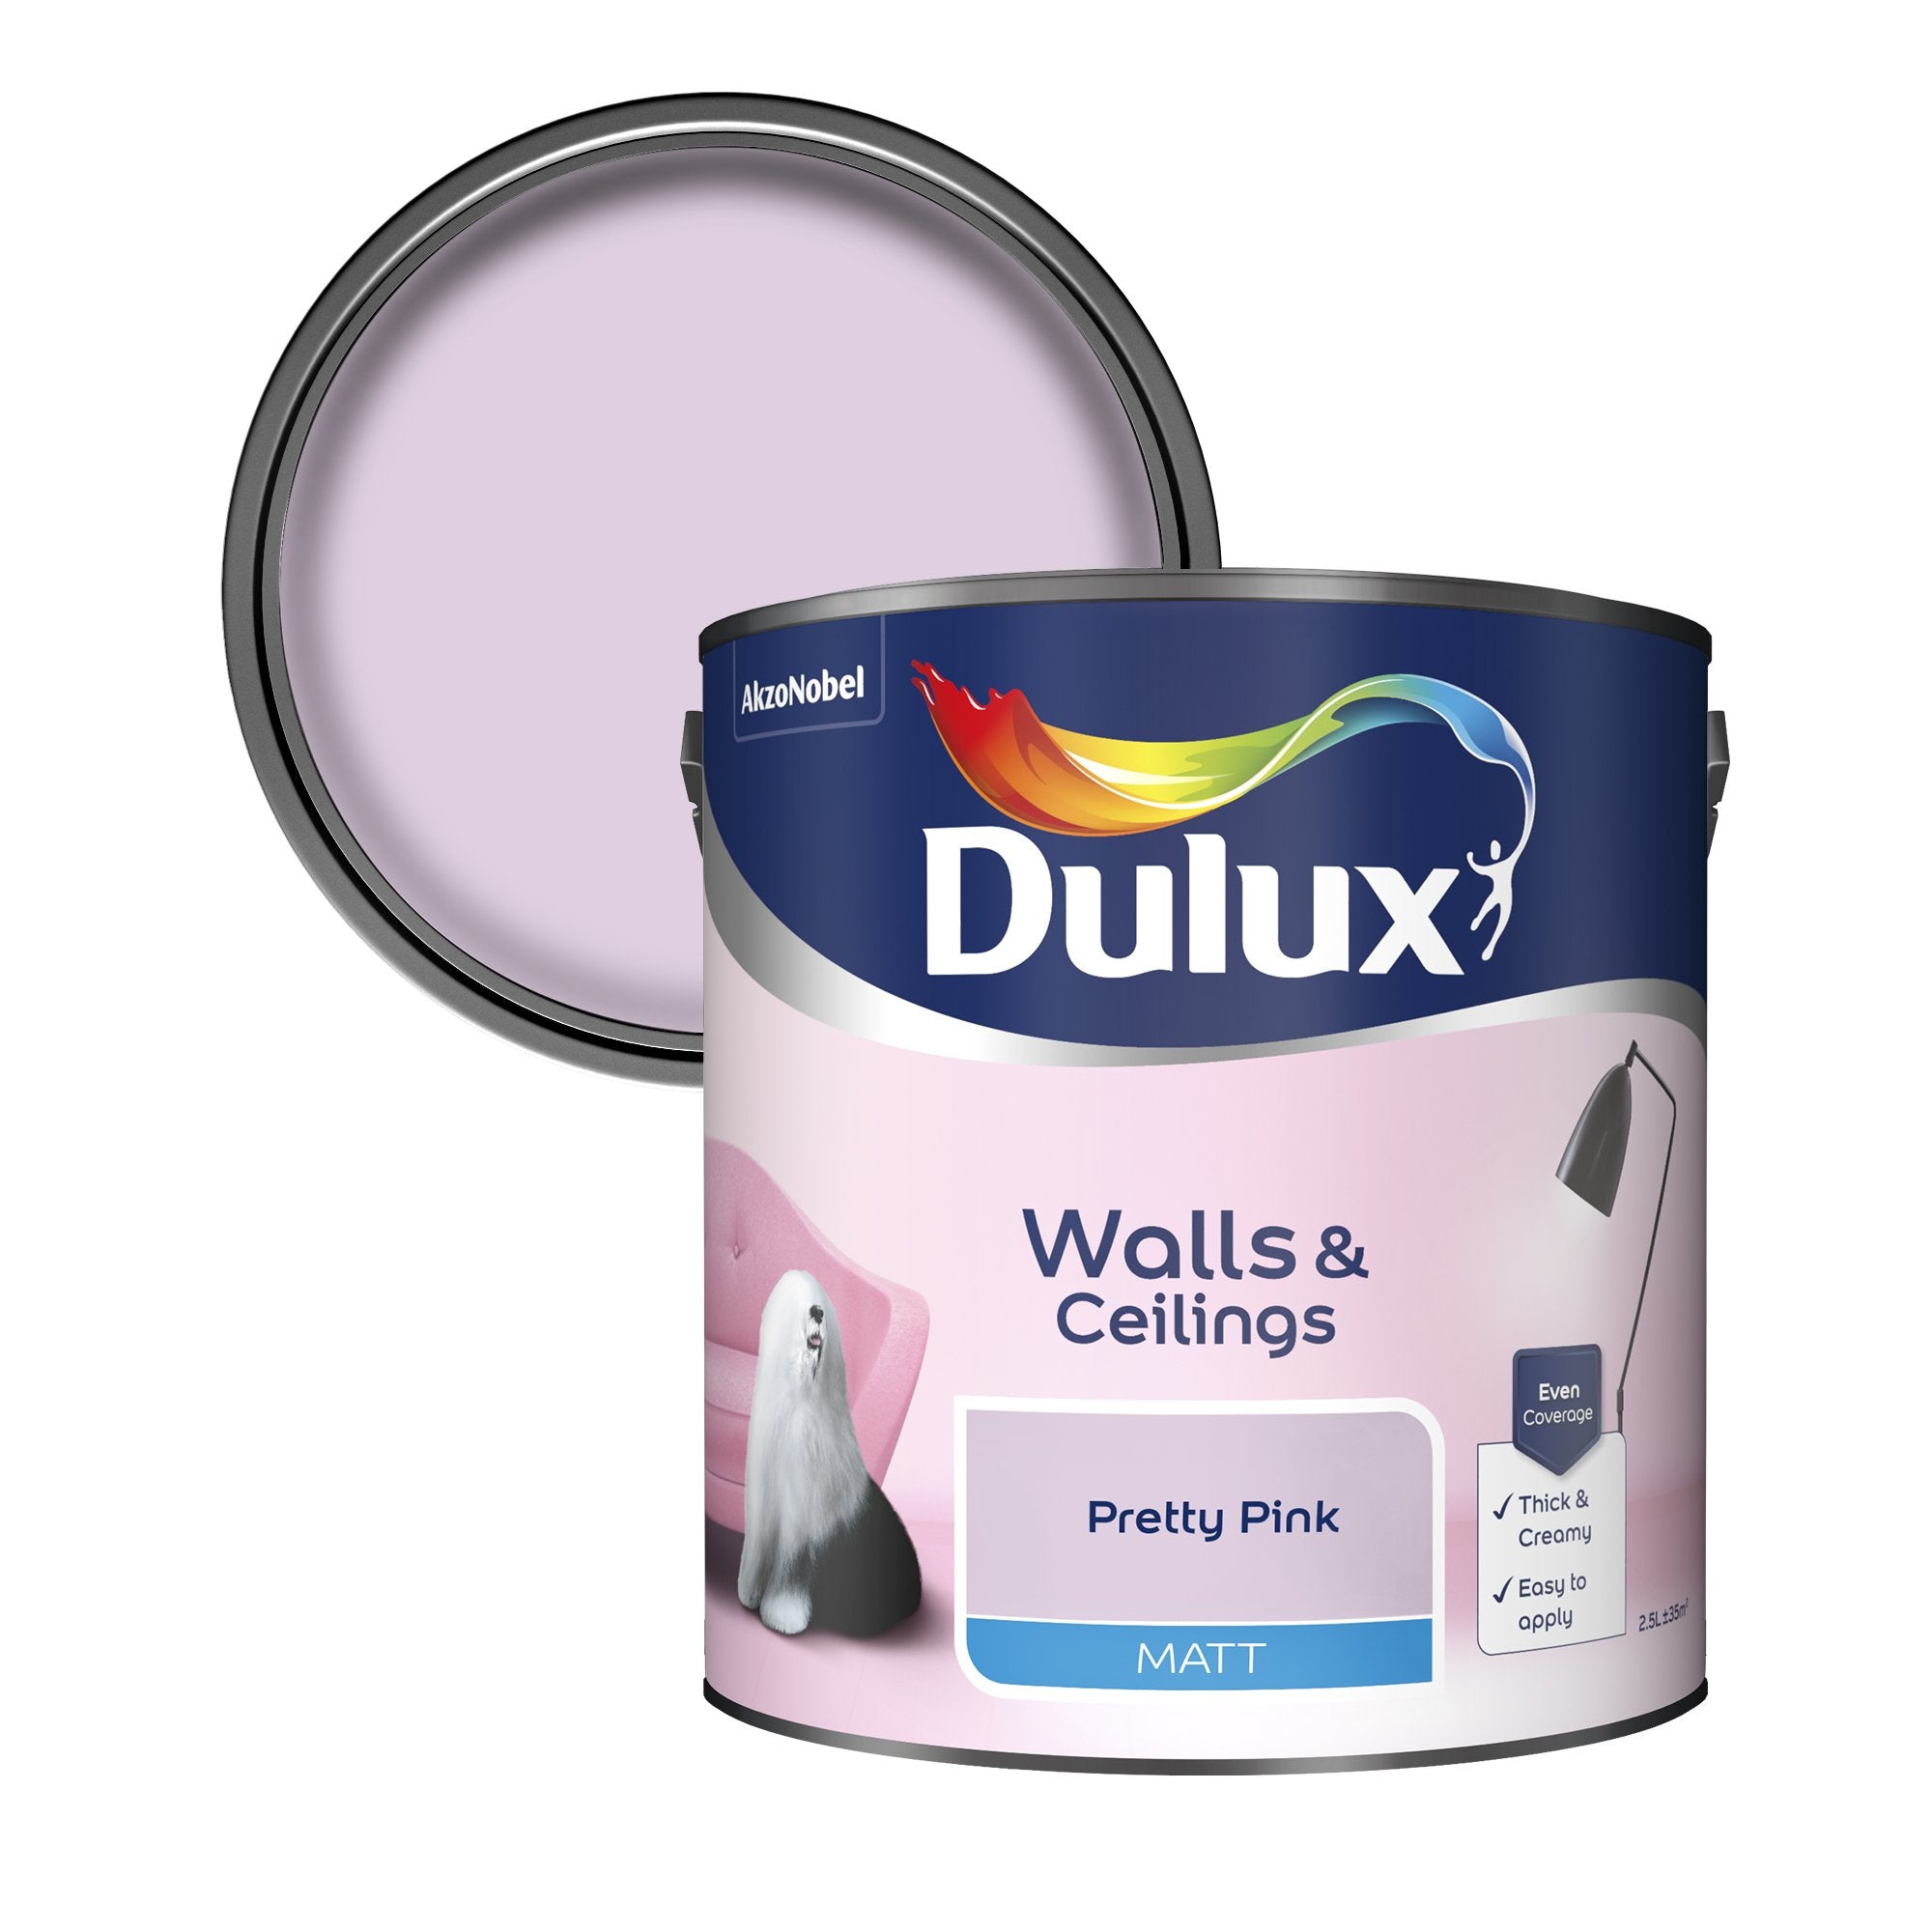 Dulux-Matt-Emulsion-Paint-For-Walls-And-Ceilings-Pretty-Pink-2.5L